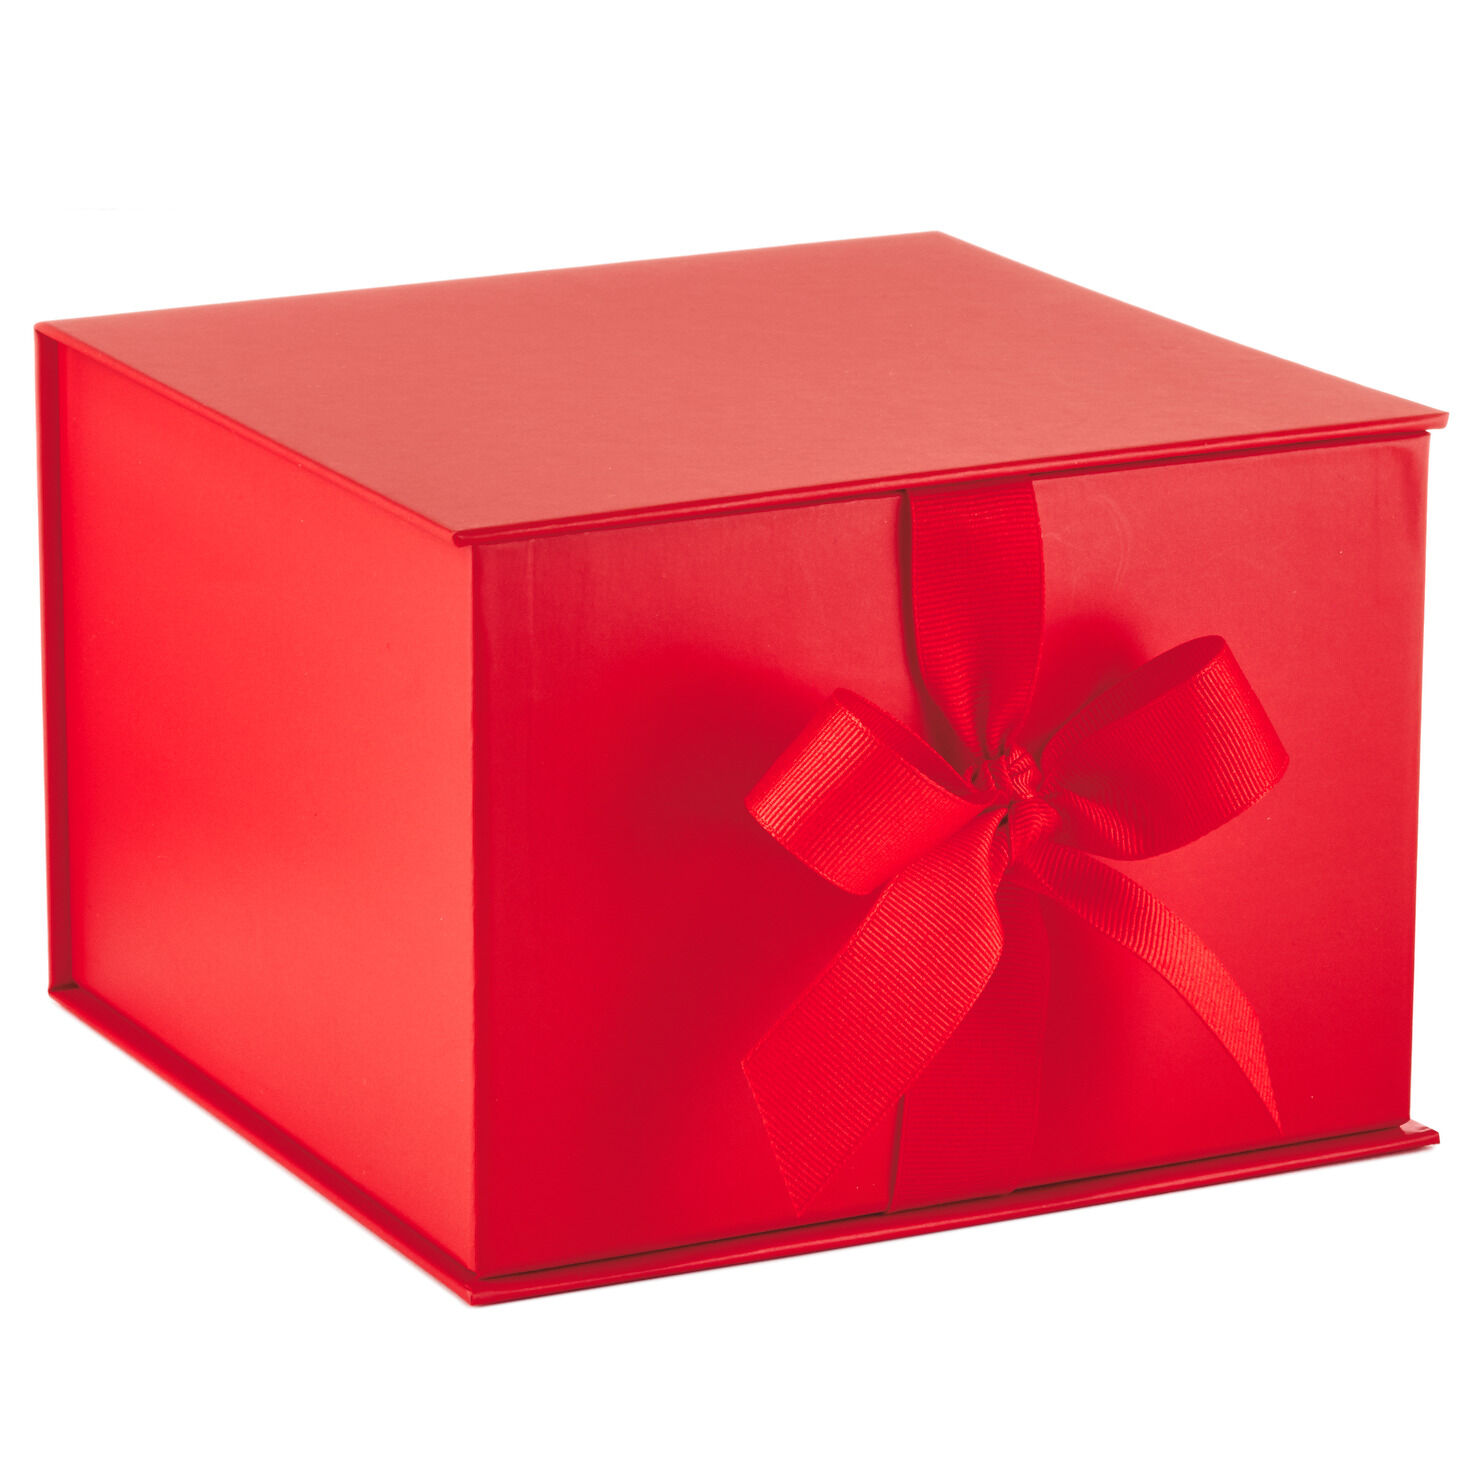 4 Round Nested Gift Boxes Holiday Red Valentine/'s Day Weddings Gifts Storage